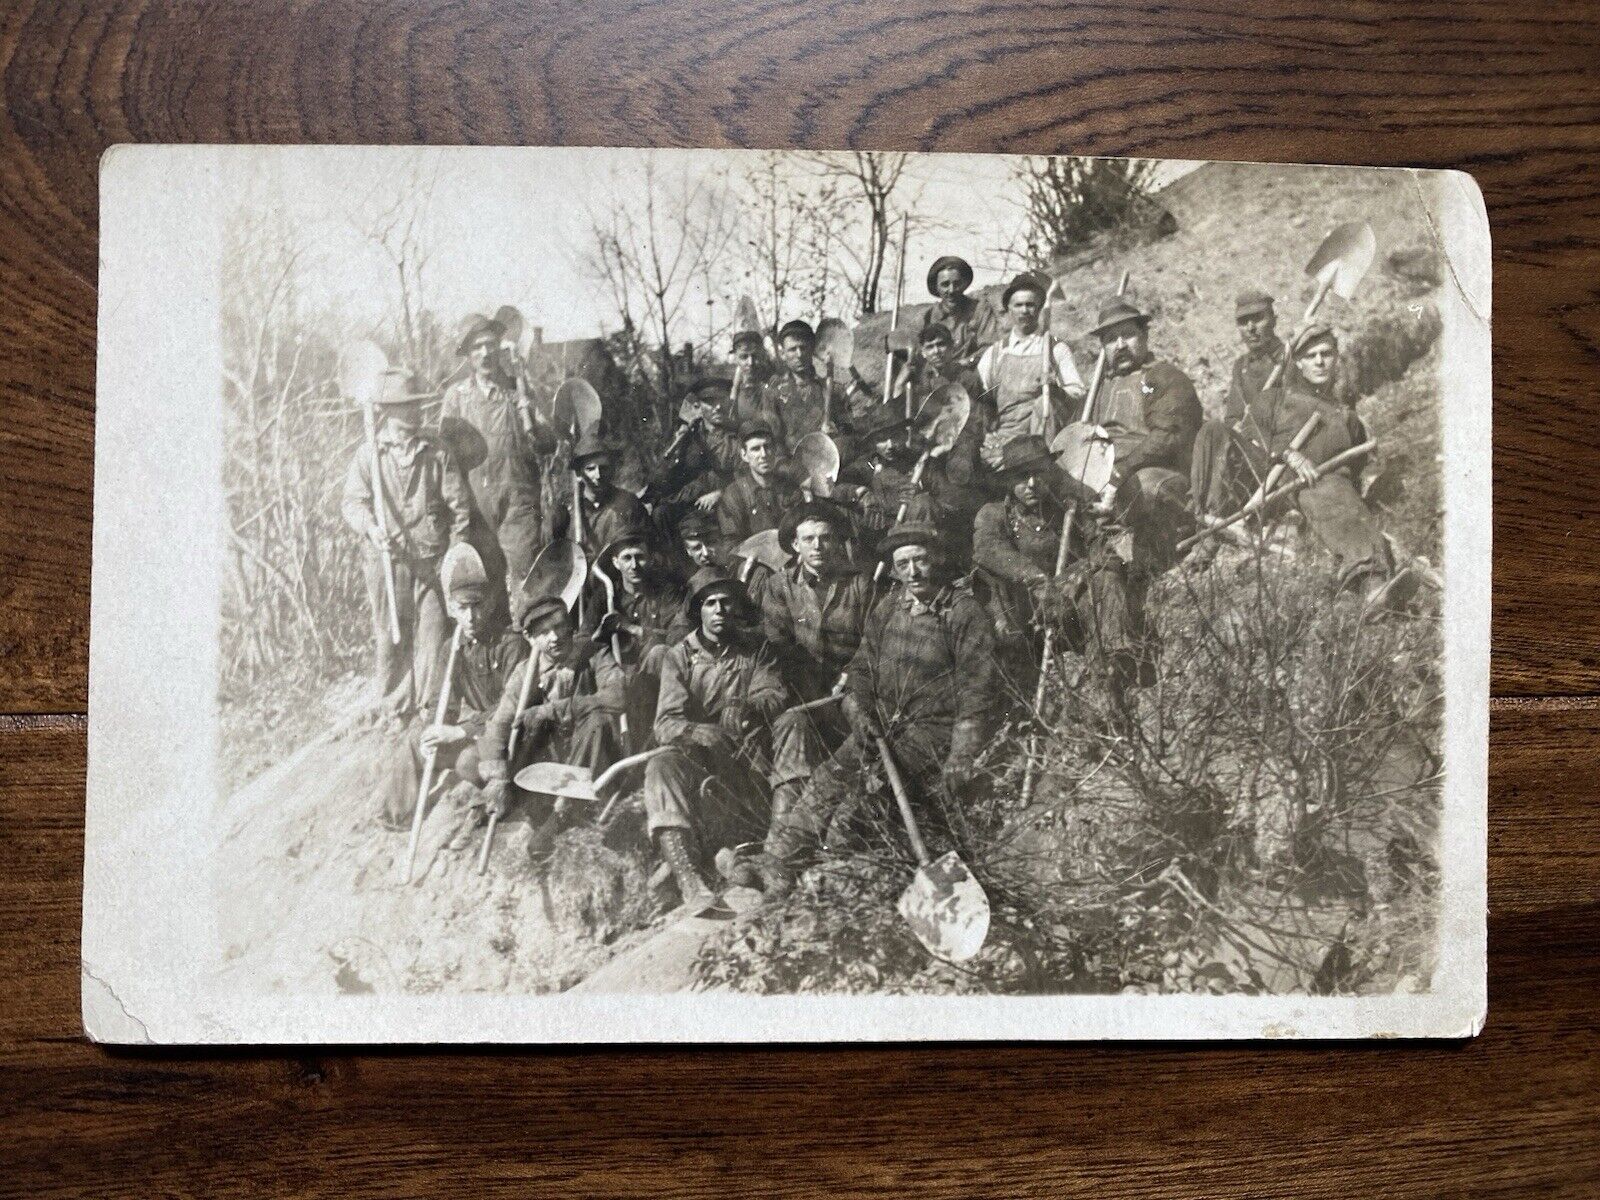 Michigan Copper Mines Painesdale Miners & Shovels RPPC 1904-1918 Vintage Photo